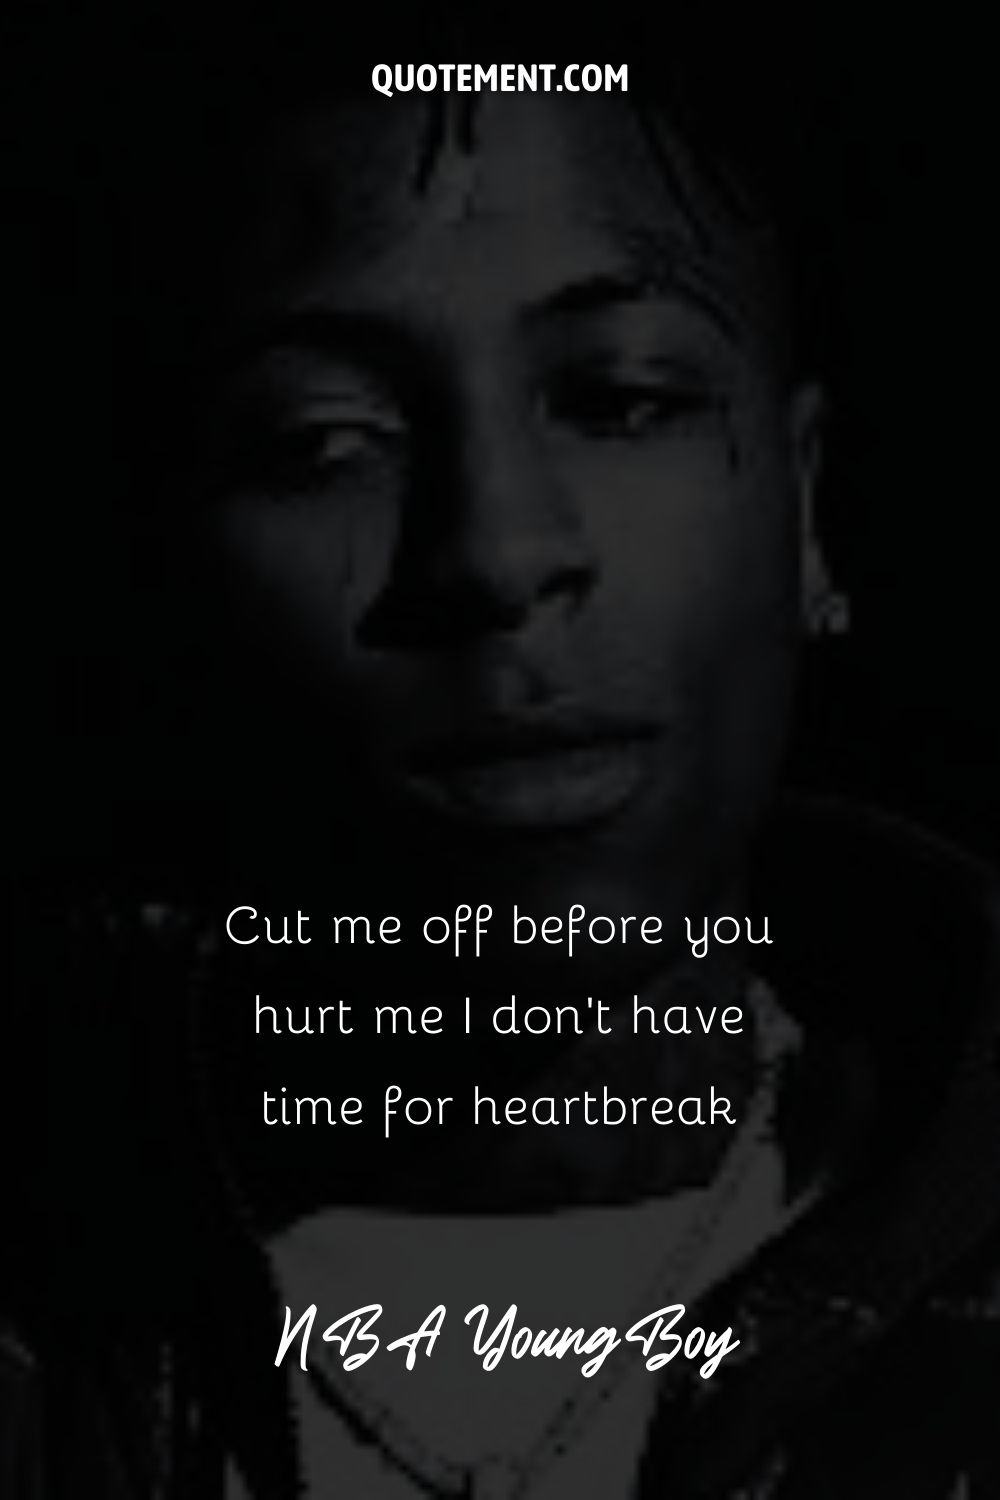 “Cut me off before you hurt me I don’t have time for heartbreak” – NBA YoungBoy